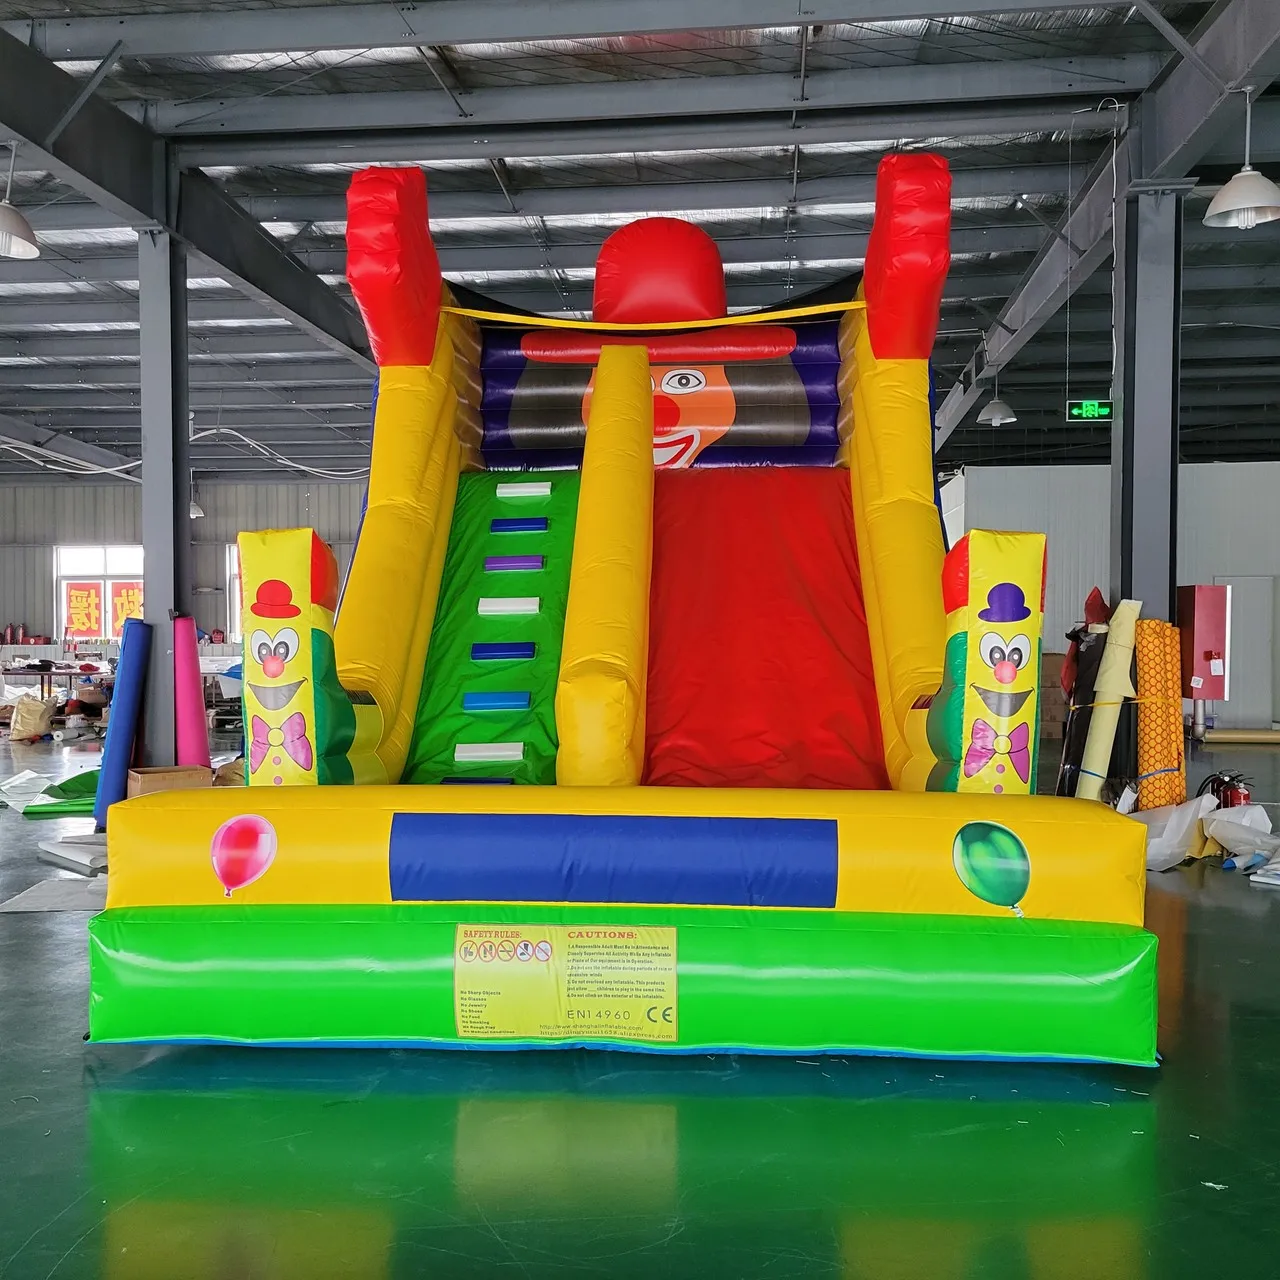 

Free Air Blower offered Factory Customized PVC Mesh Brightly Colored Bouncy Castle Inflatable Bounce House With Slide Pool